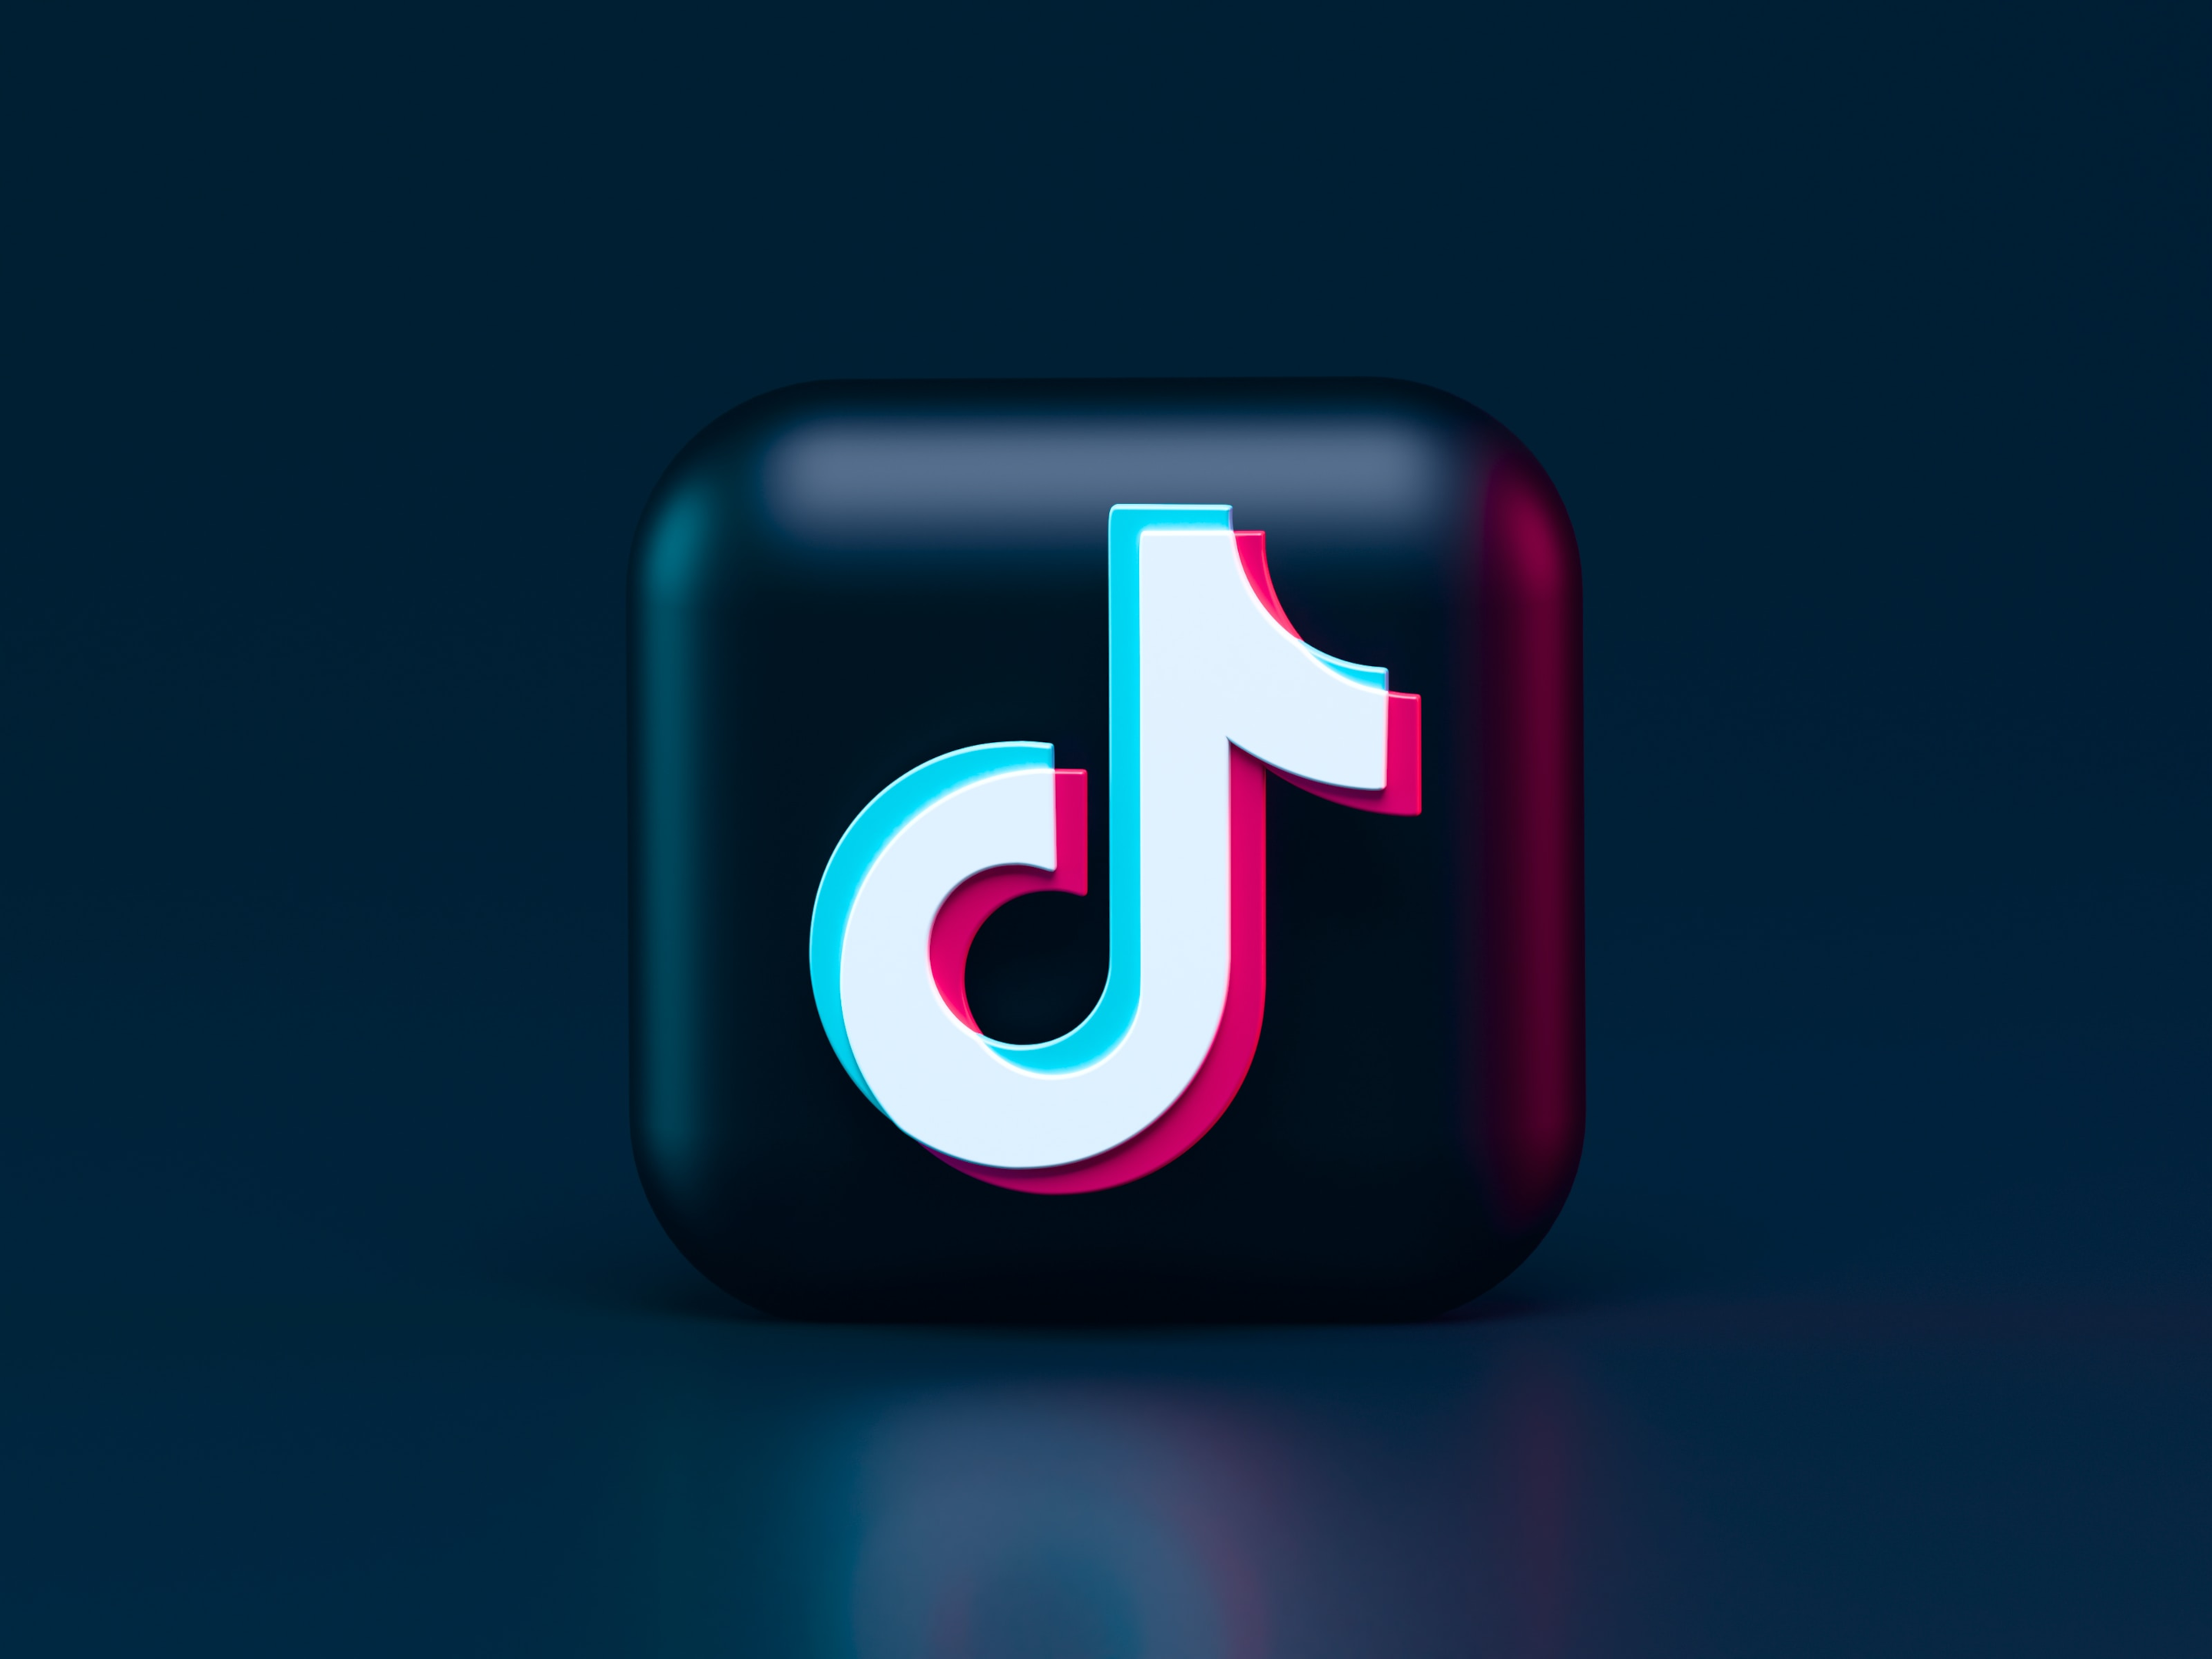 TikTok is a later iteration of the social media trend that has impacted many industries for nearly 20 years.